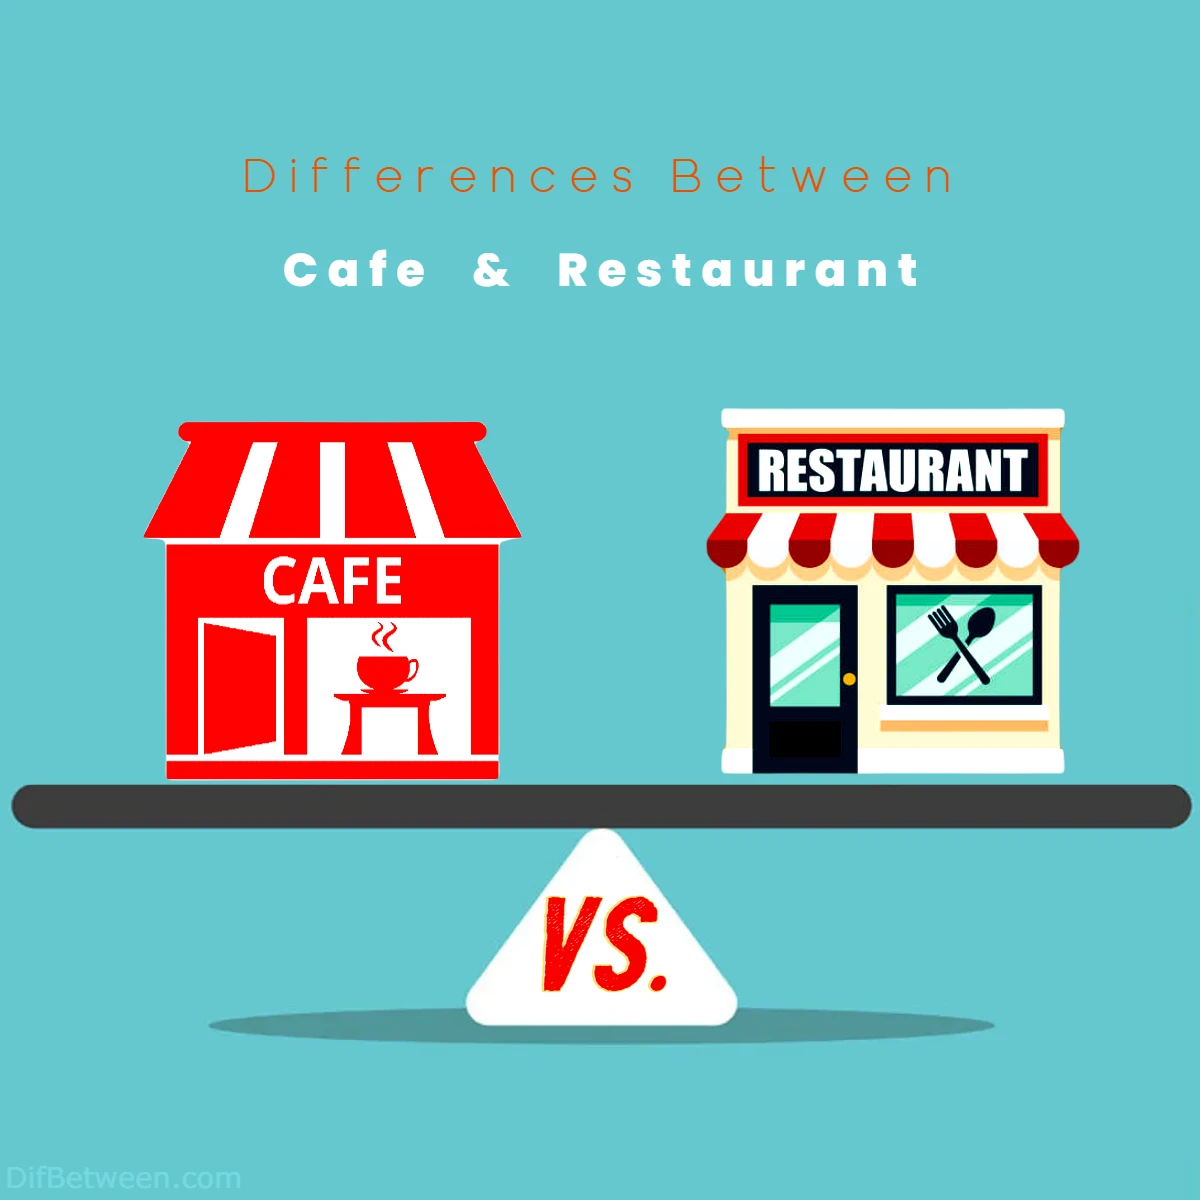 Differences Between Cafe vs Restaurant